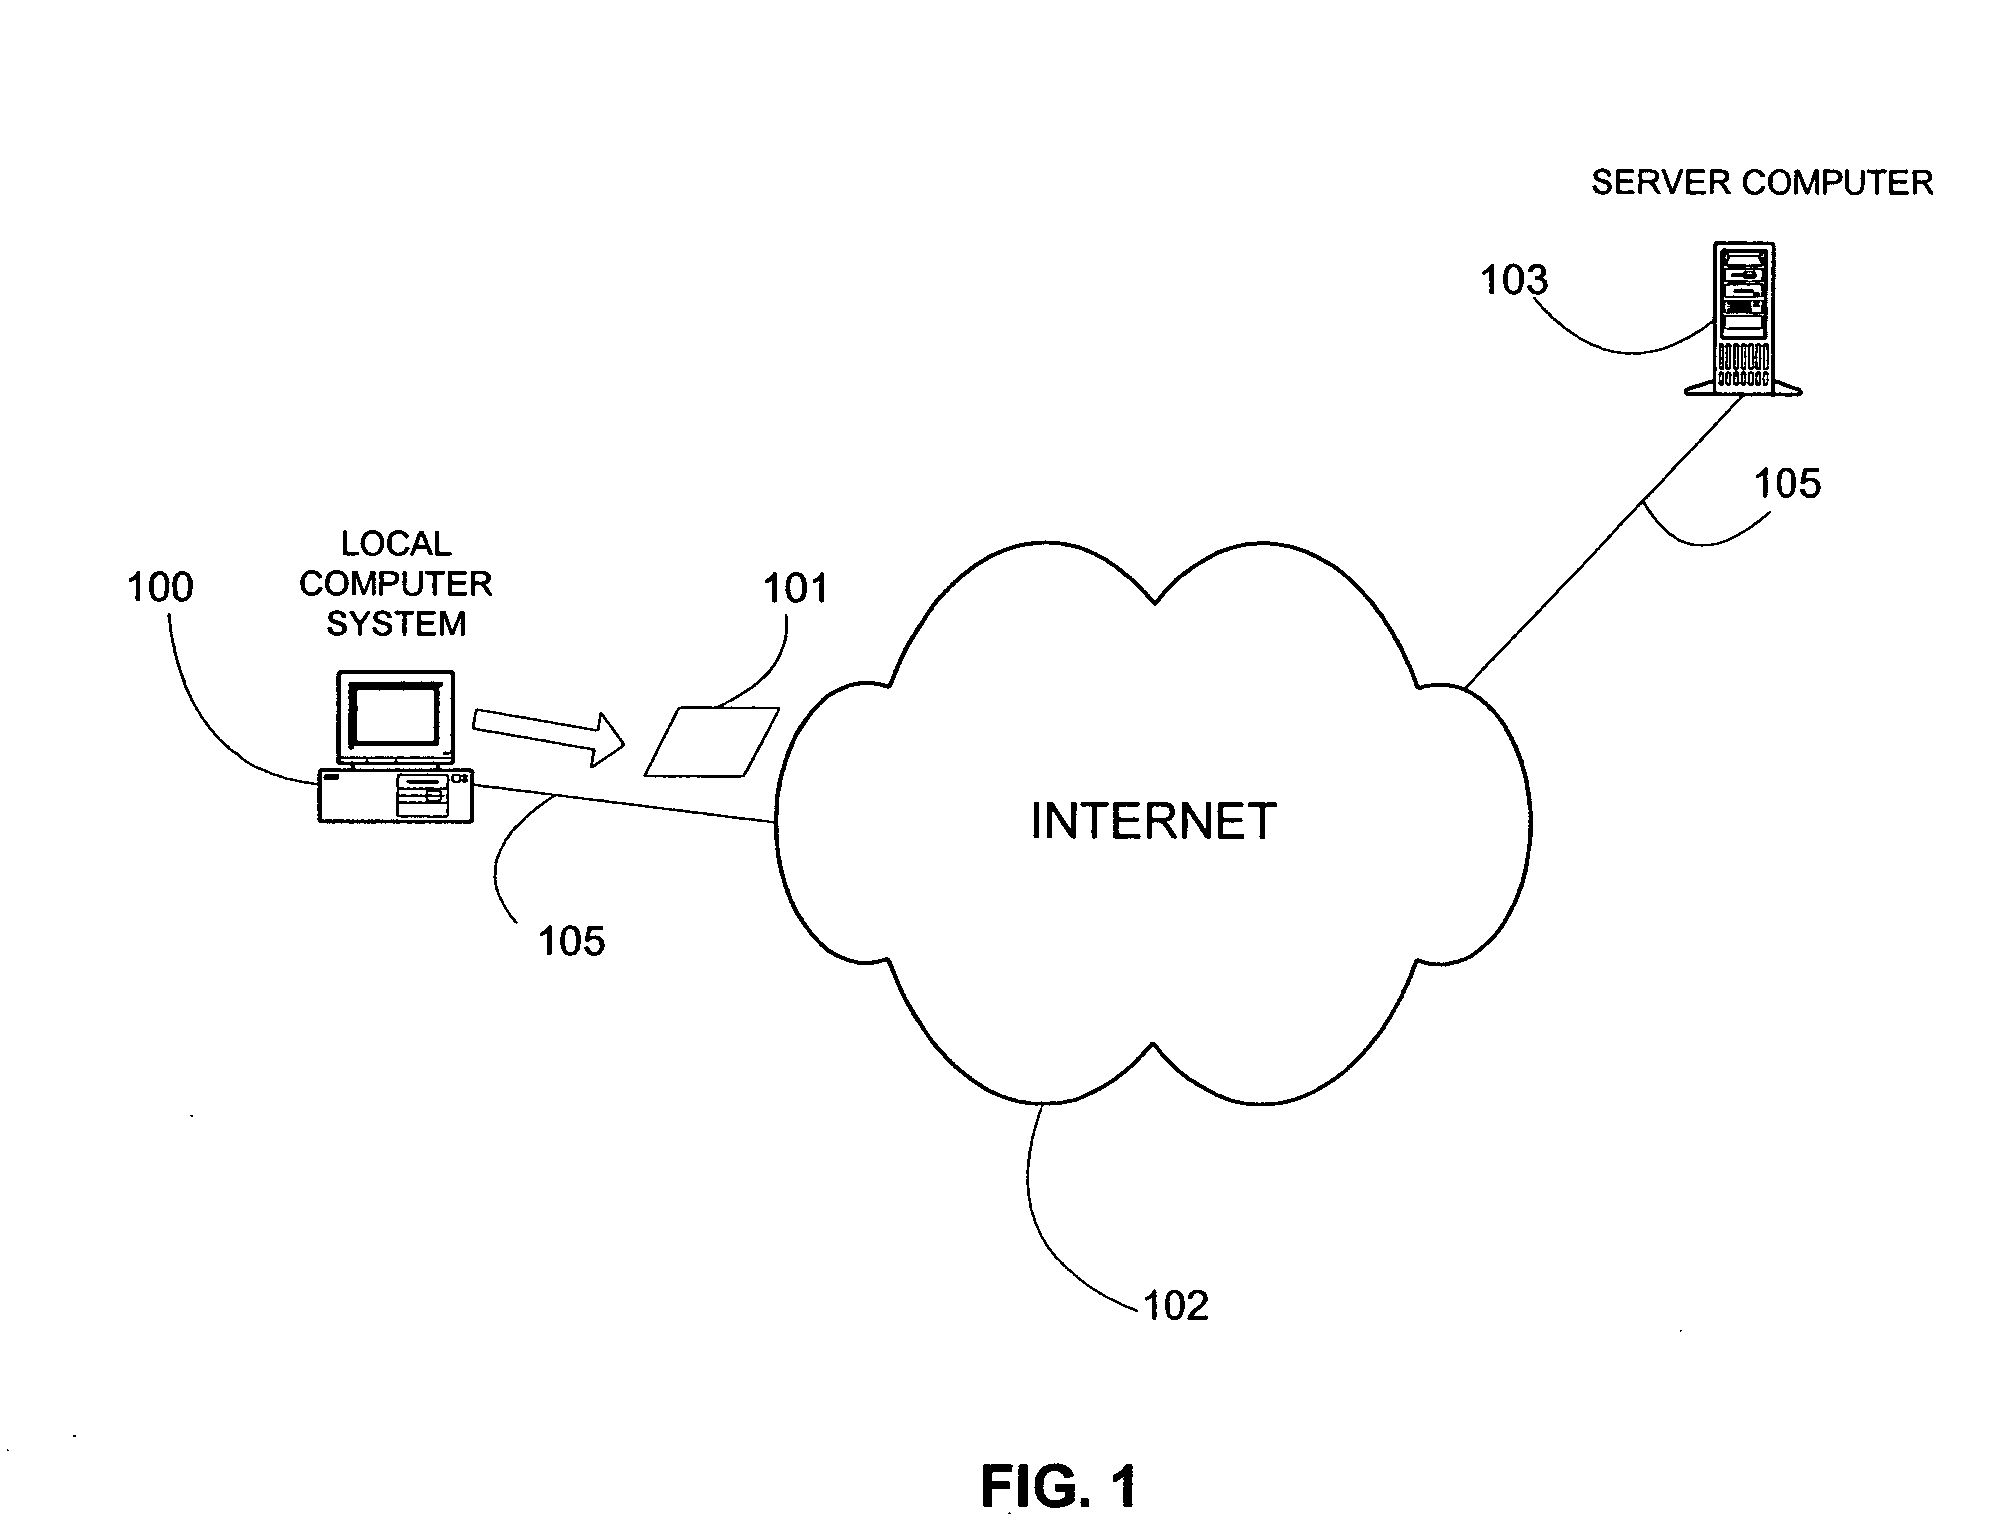 Method and system for automated data collection and analysis of a computer system